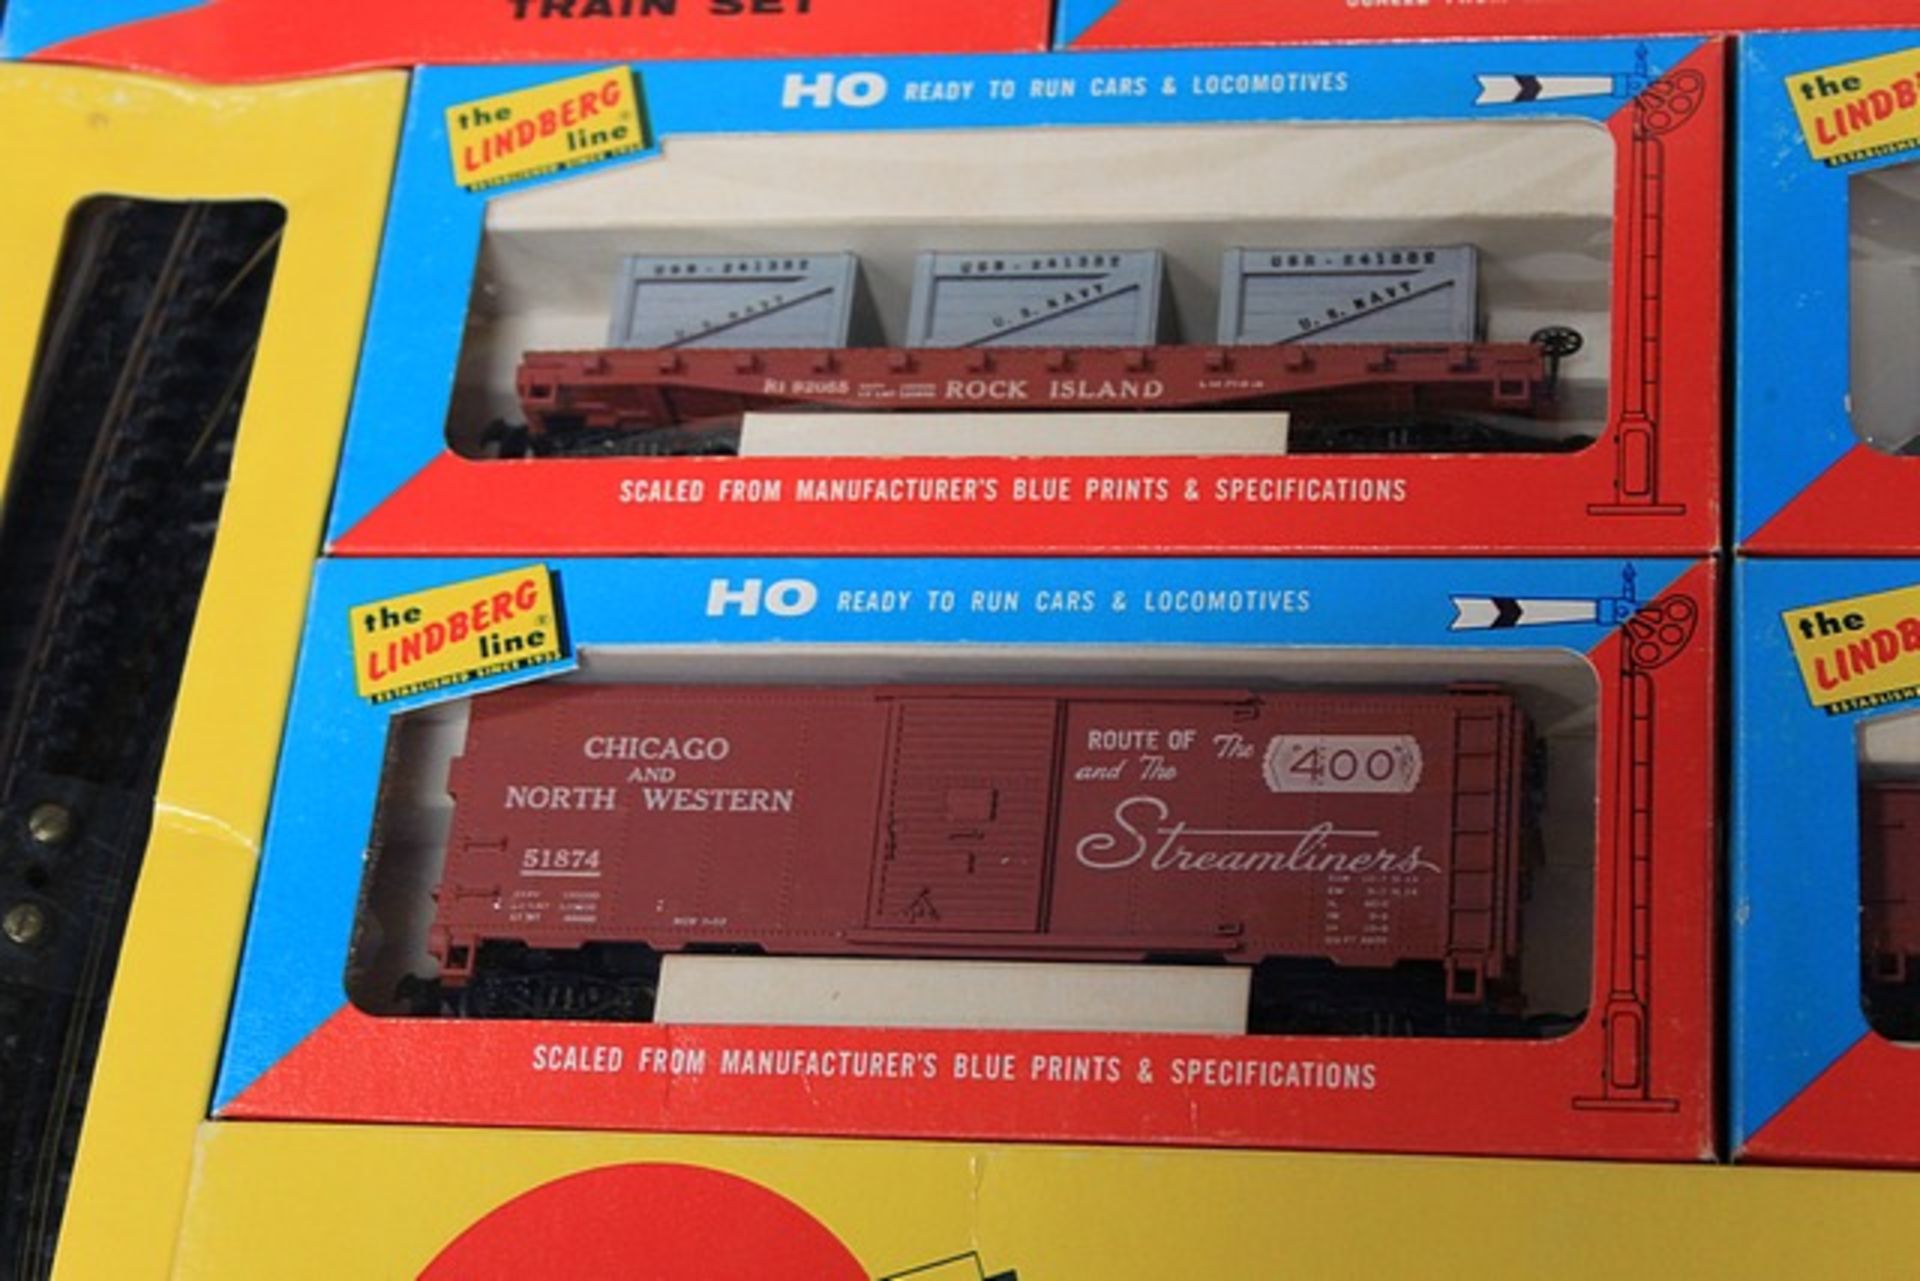 The Lindberg Line Ready to run H0 Train Set in box (Never been out of box) - Image 2 of 5